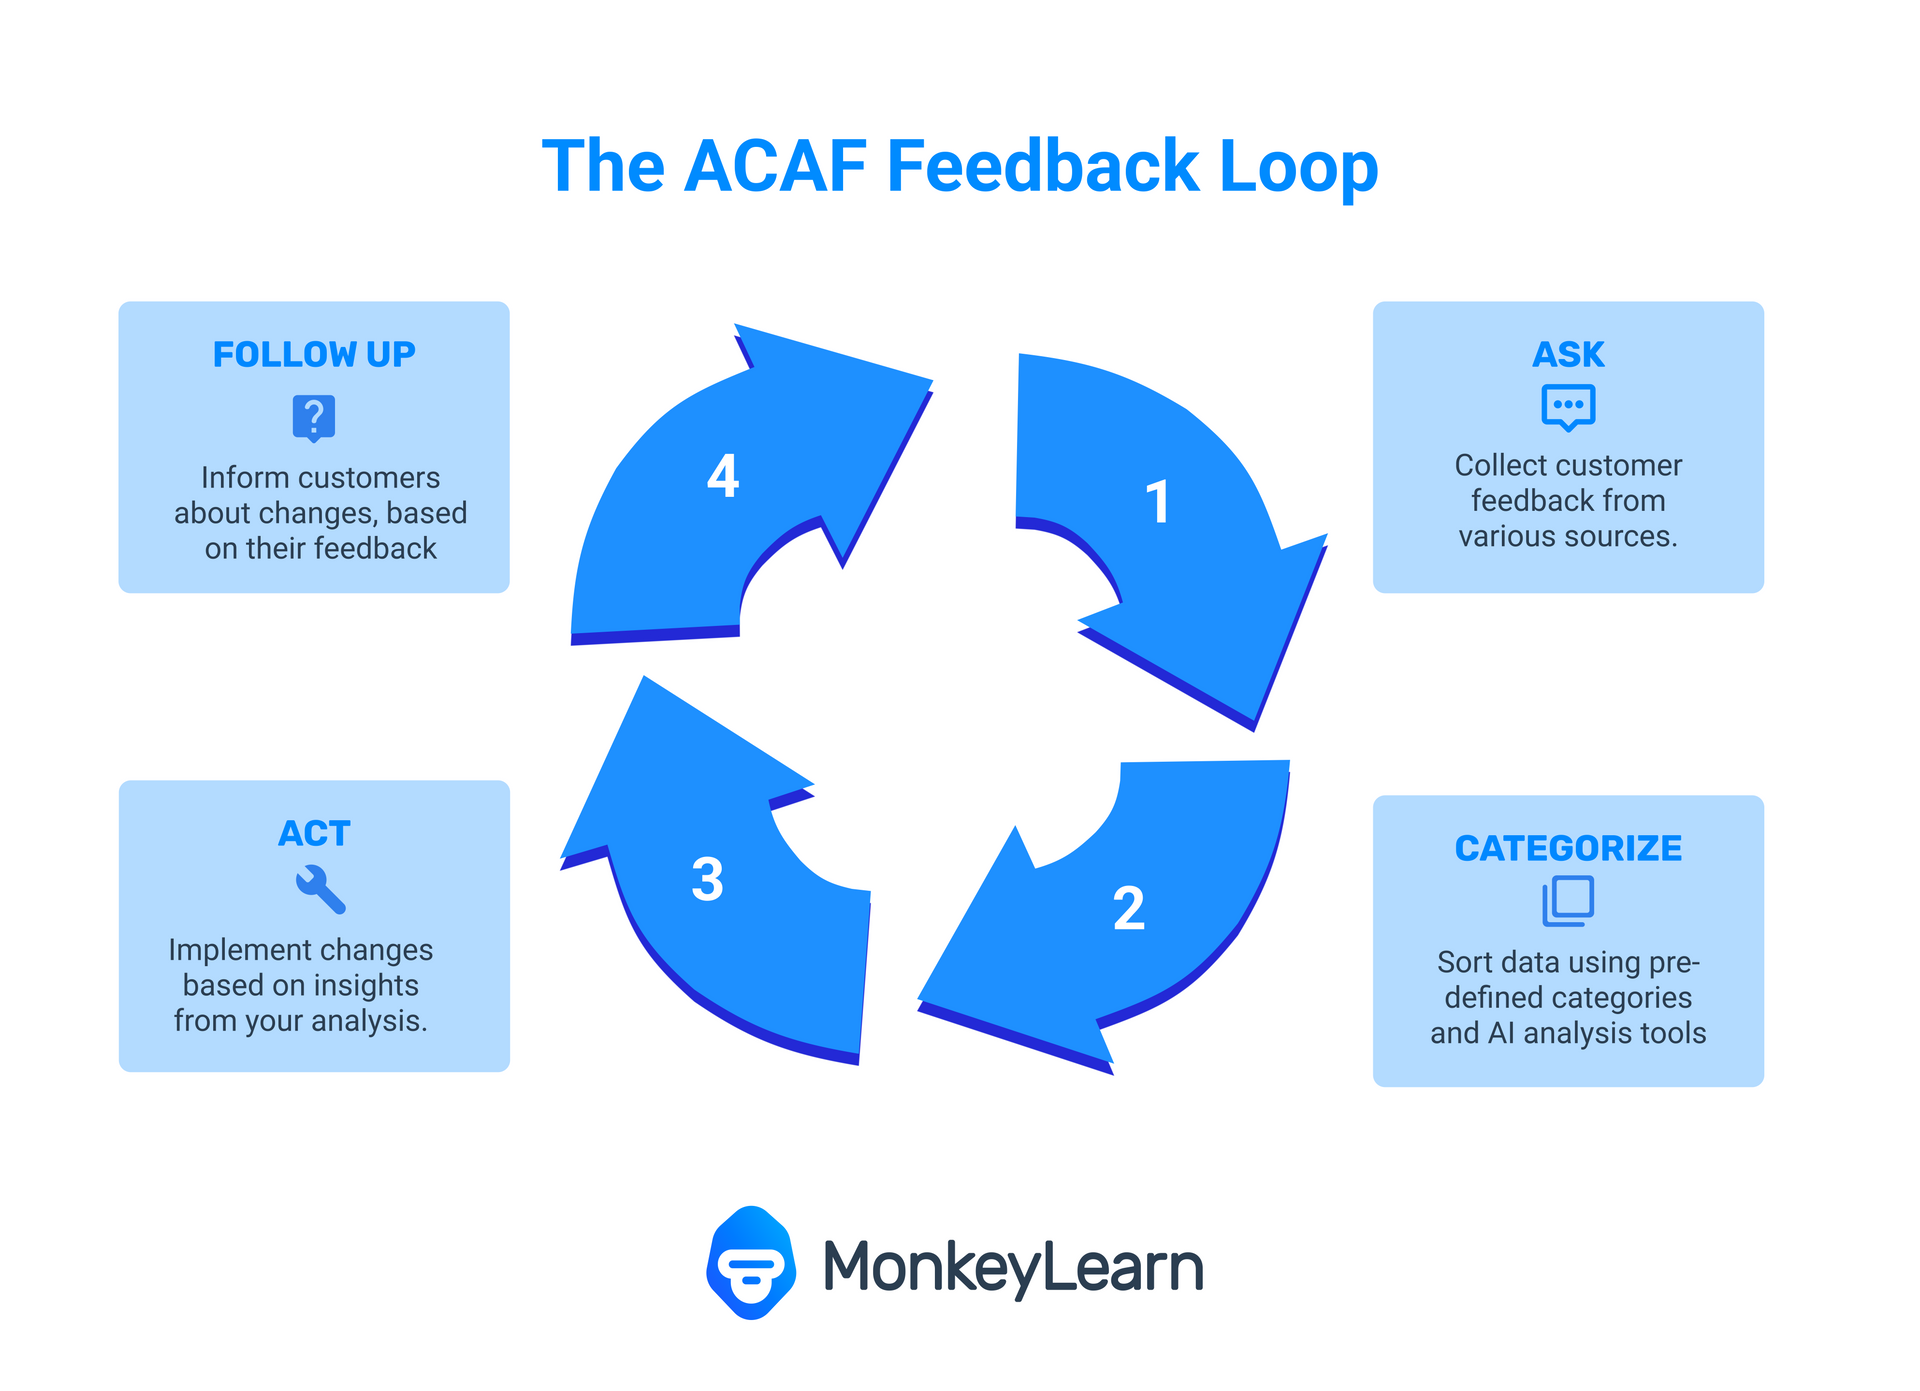 the ACAF customer feedback system: ask, categorize, act, and follow up